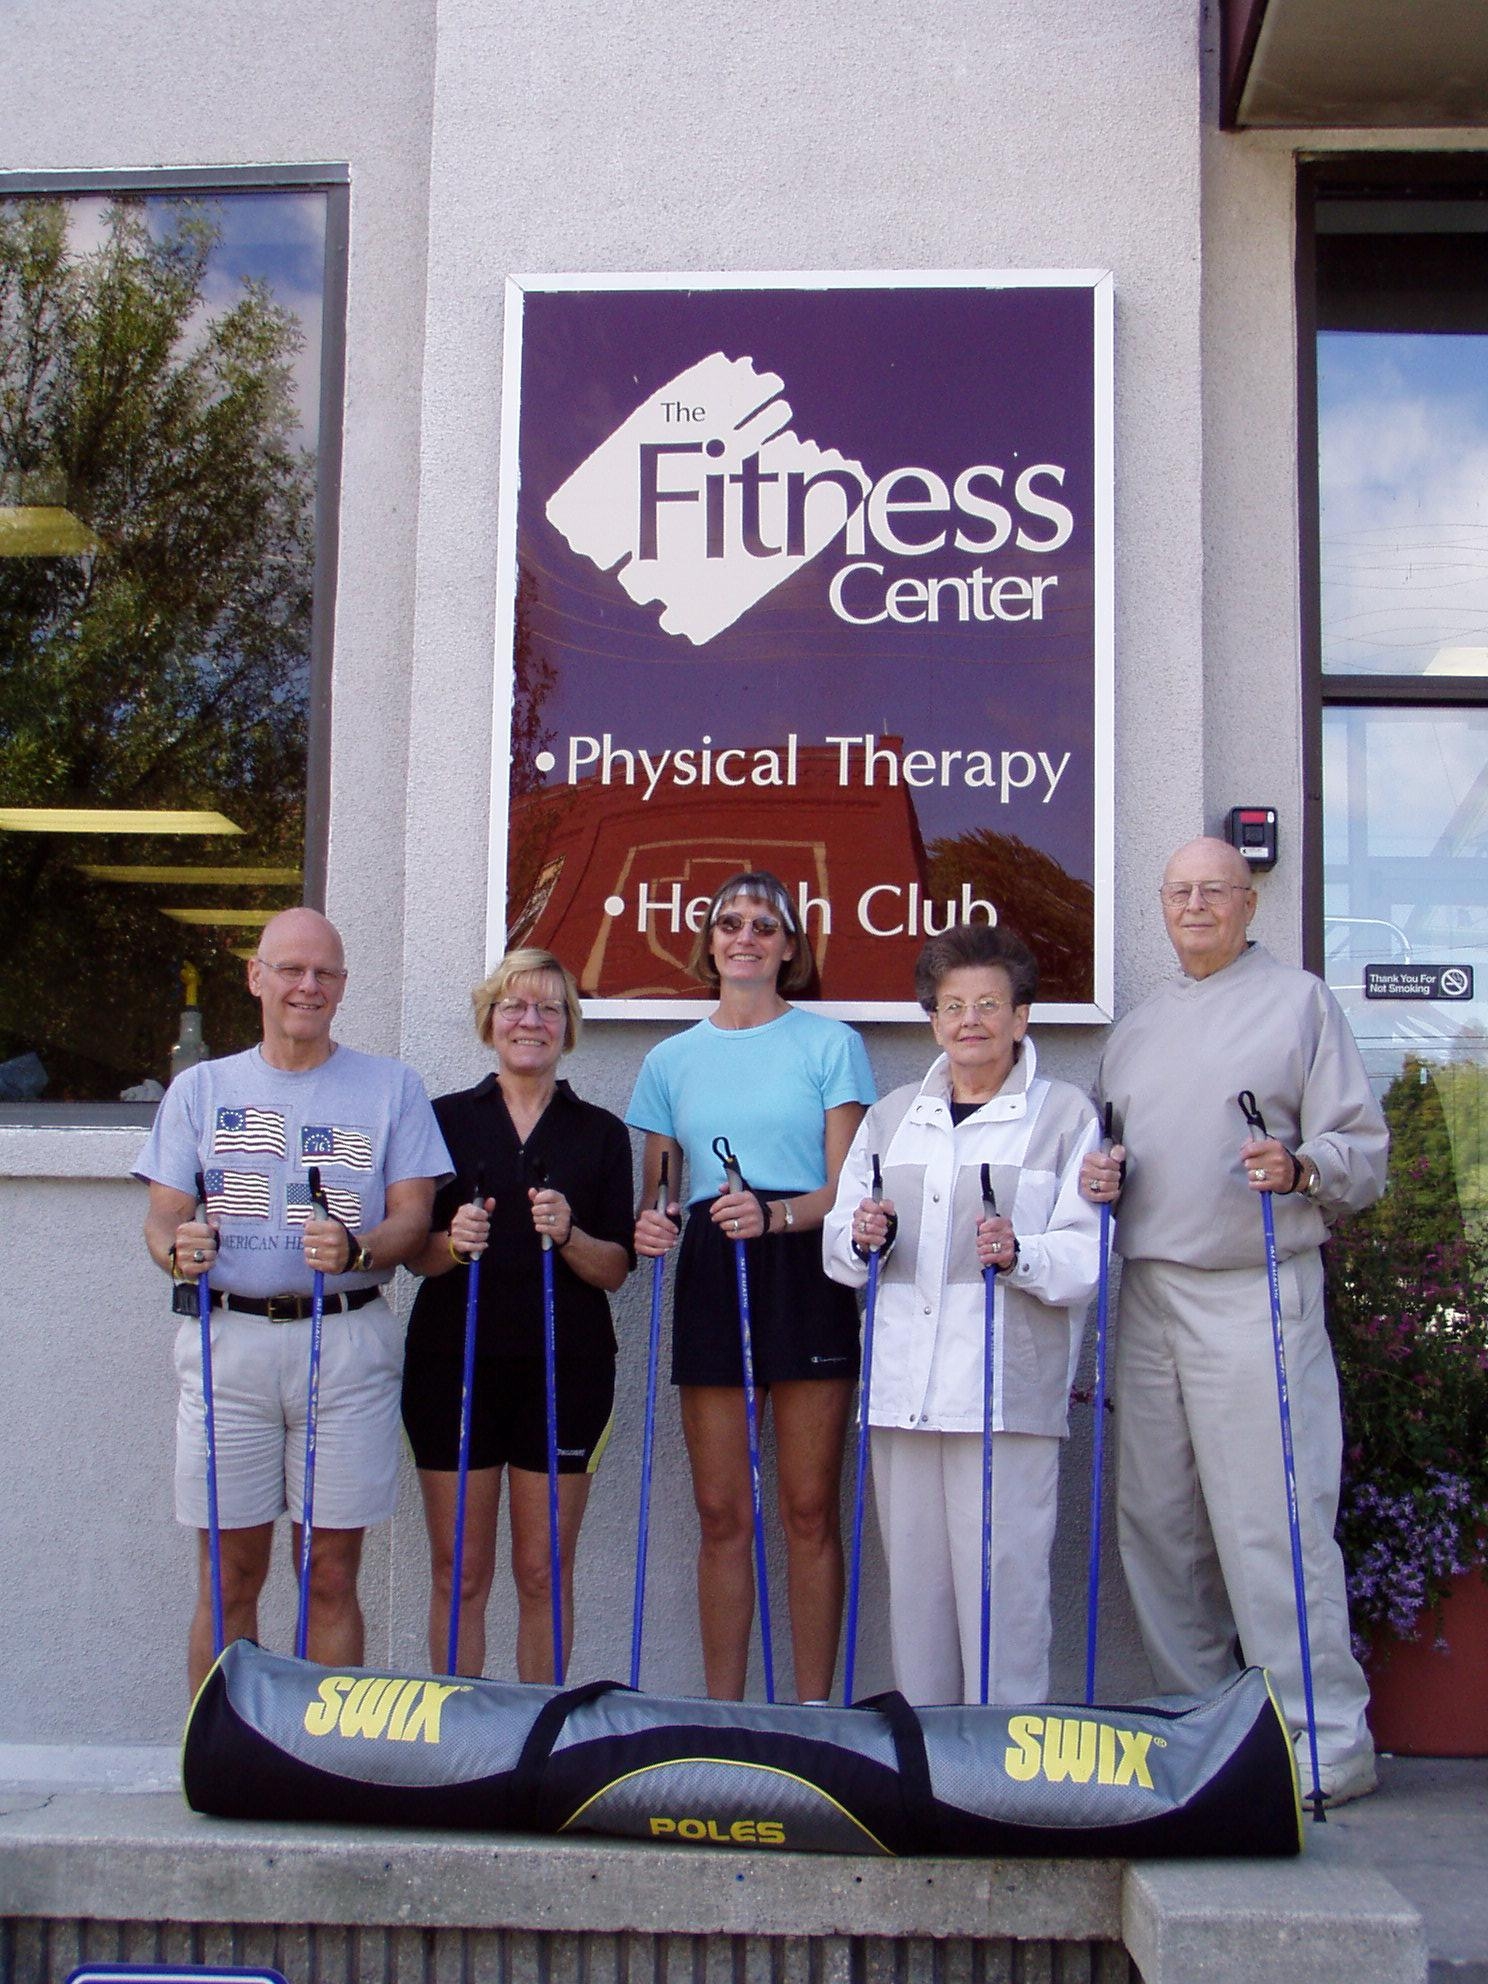 Nordic Ski Walking Classes At The Fitness Center Image